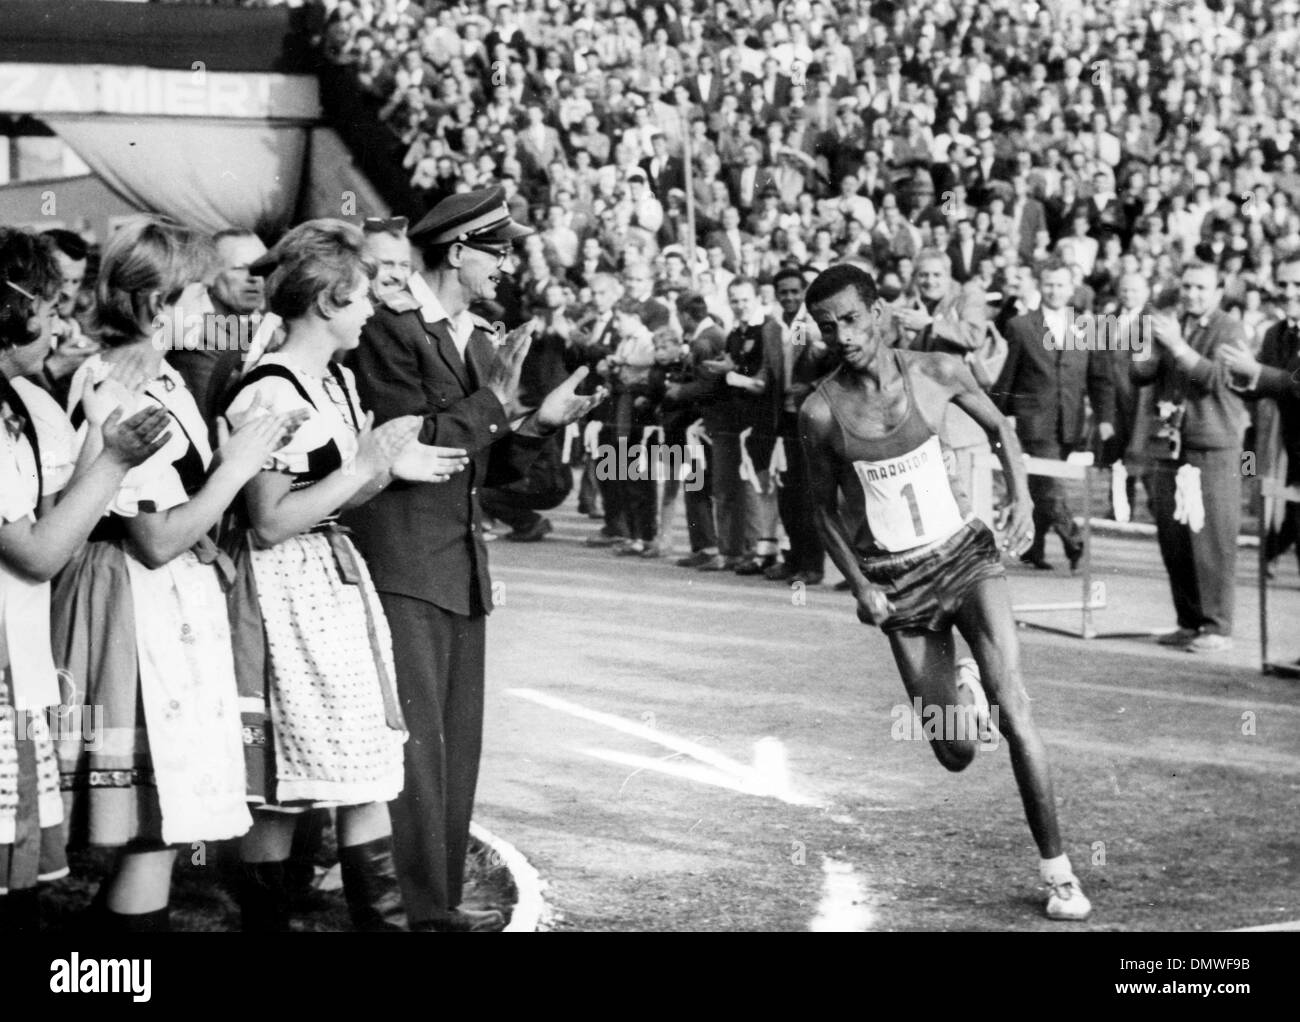 Oct 11, 1961; Kosice, Czechoslovakia; The 31st. annual International Peace Marathon took place last weekend in the East Slovak town of Kosice, Czechoslovakia. The event was won by BIKILA ABEBE of Ethiopia, with second Dr. Pavel Kantorek (CSSR) and in third place the Japanese long distance runner Nakao. In the picture, the winner Bikila Abebe arrives at the 'Locomotive' Stadium at t Stock Photo